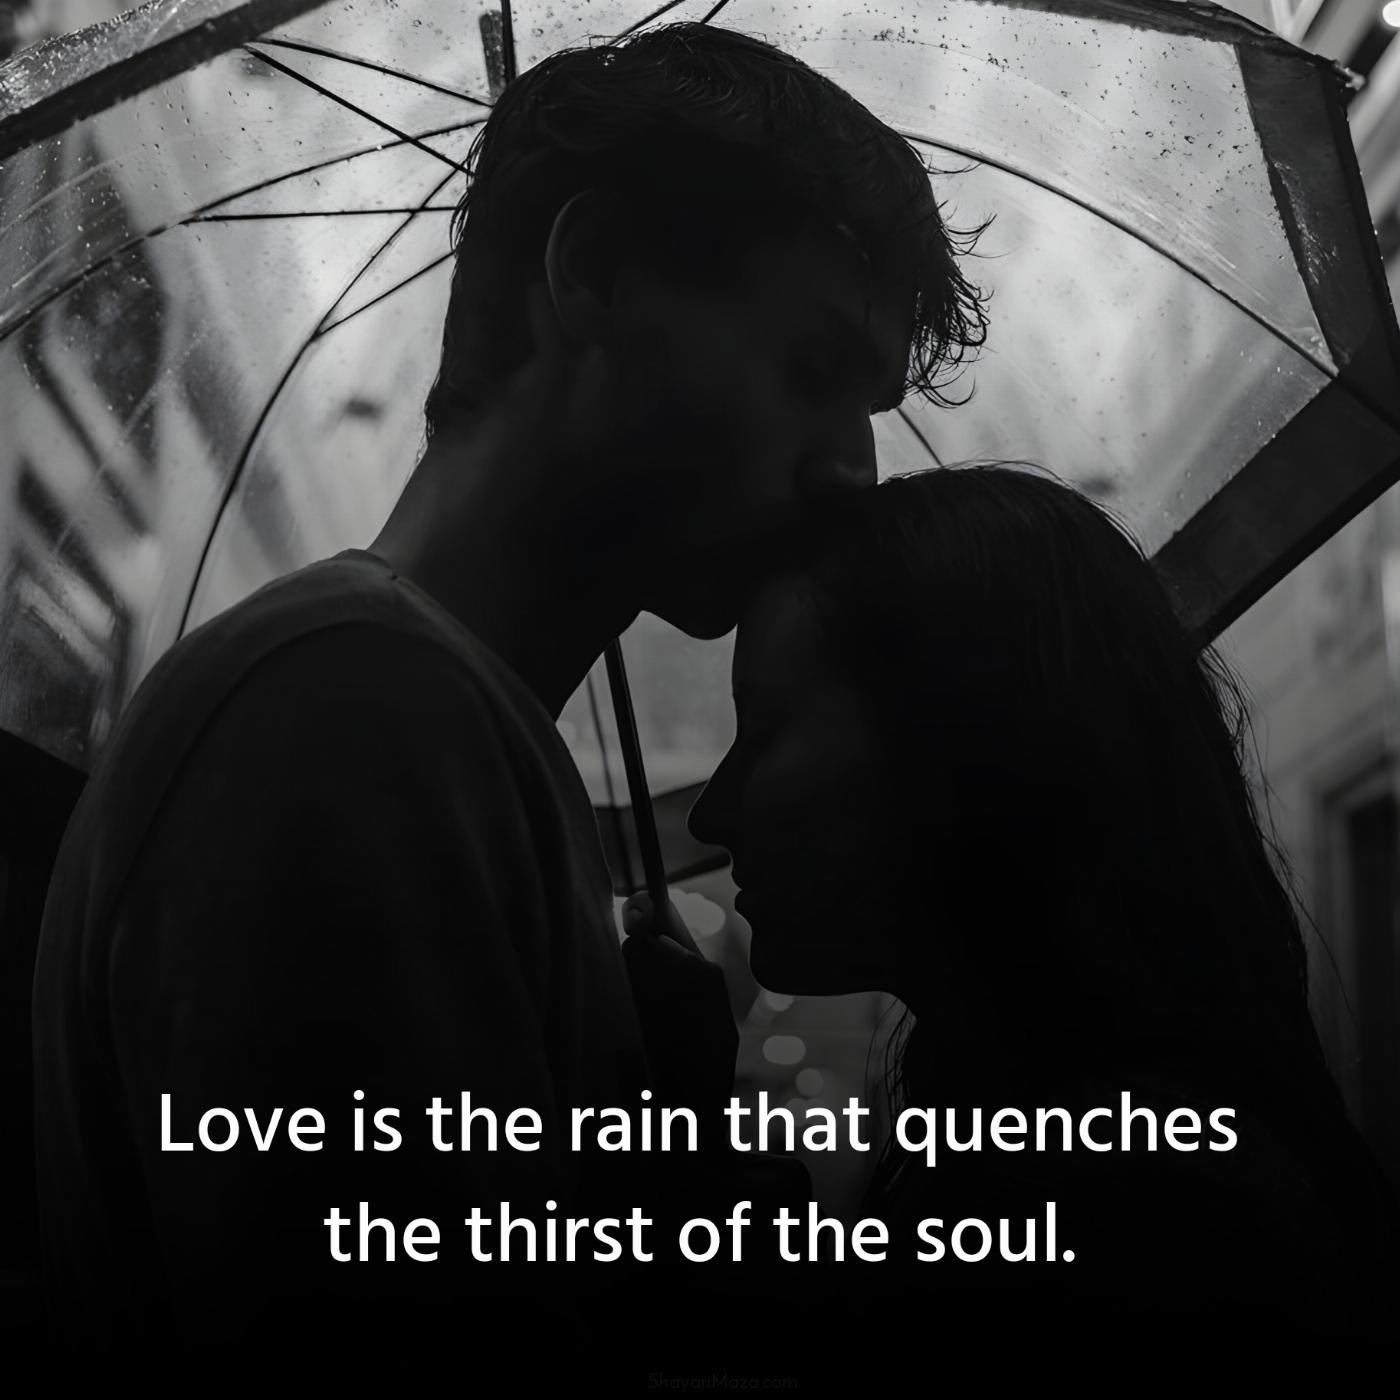 Love is the rain that quenches the thirst of the soul